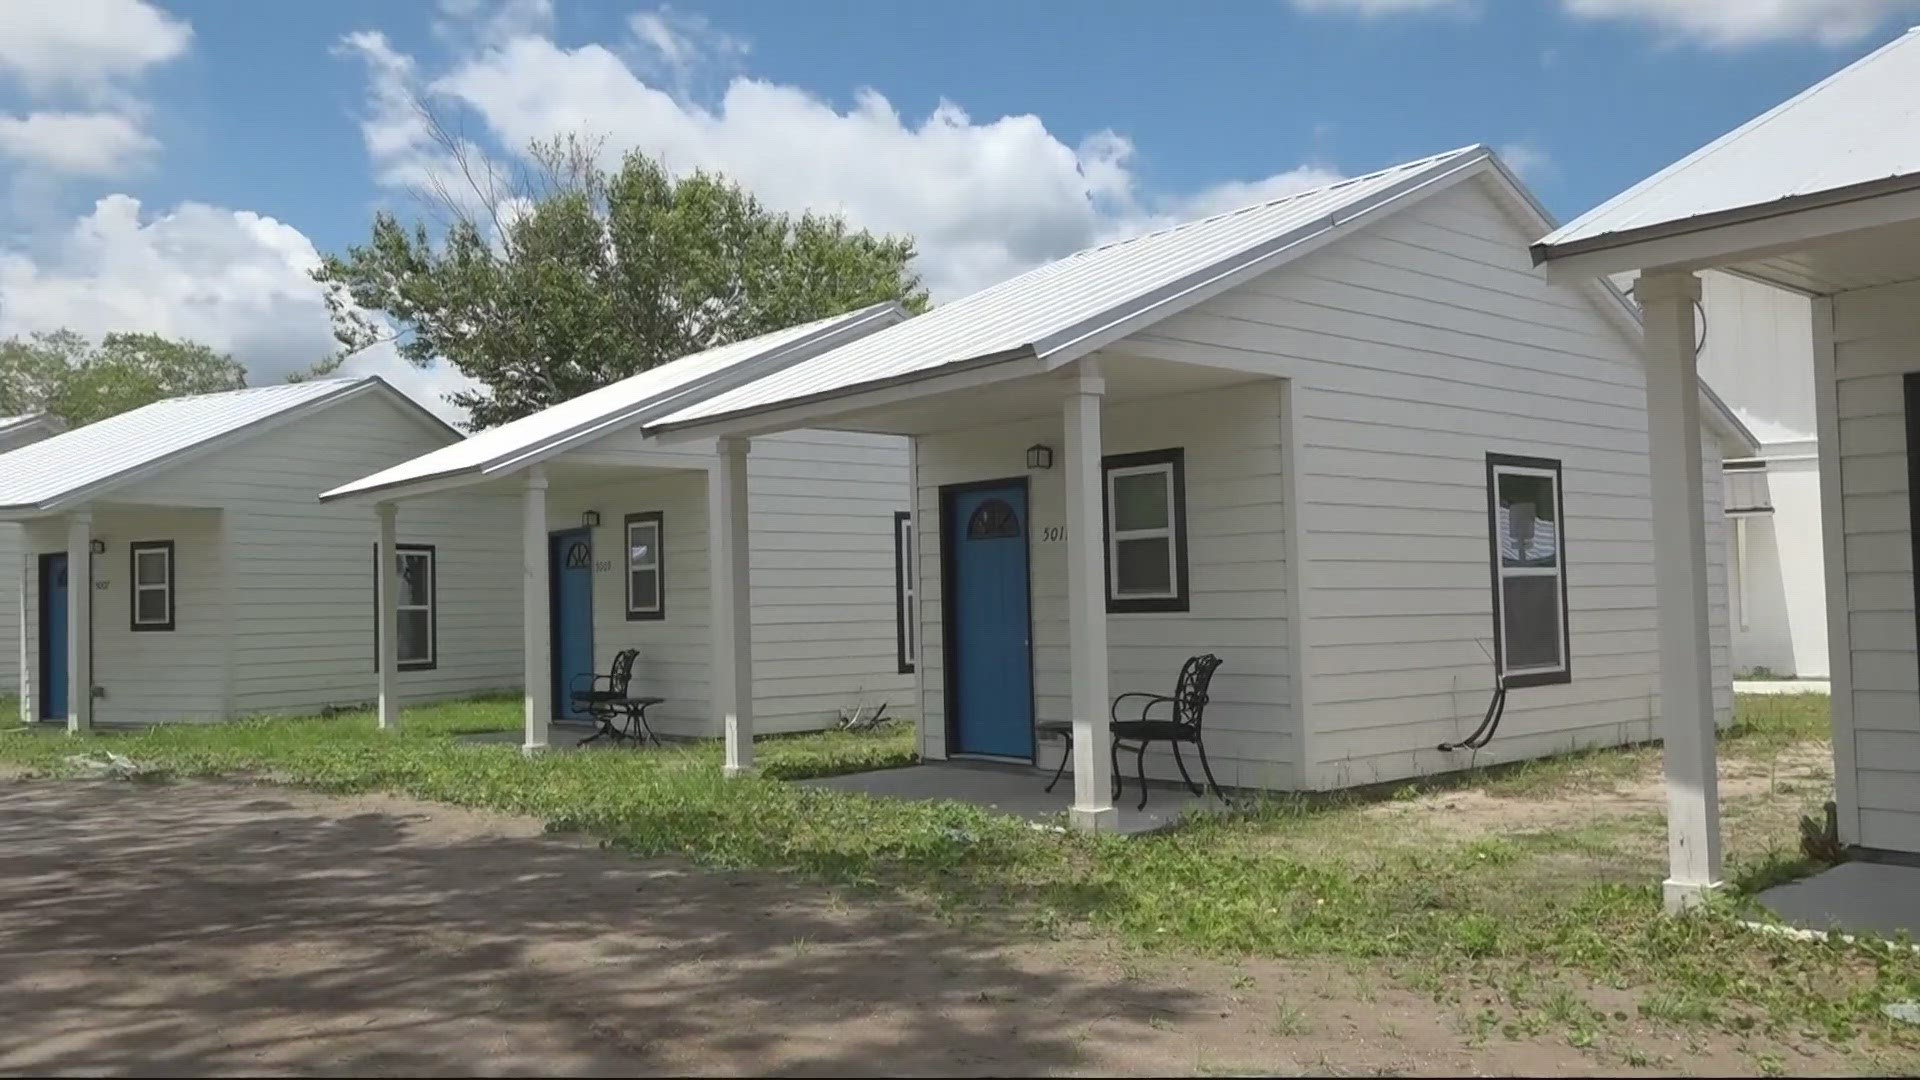 Tiny home village in Brunswick working to reduce homeless population.